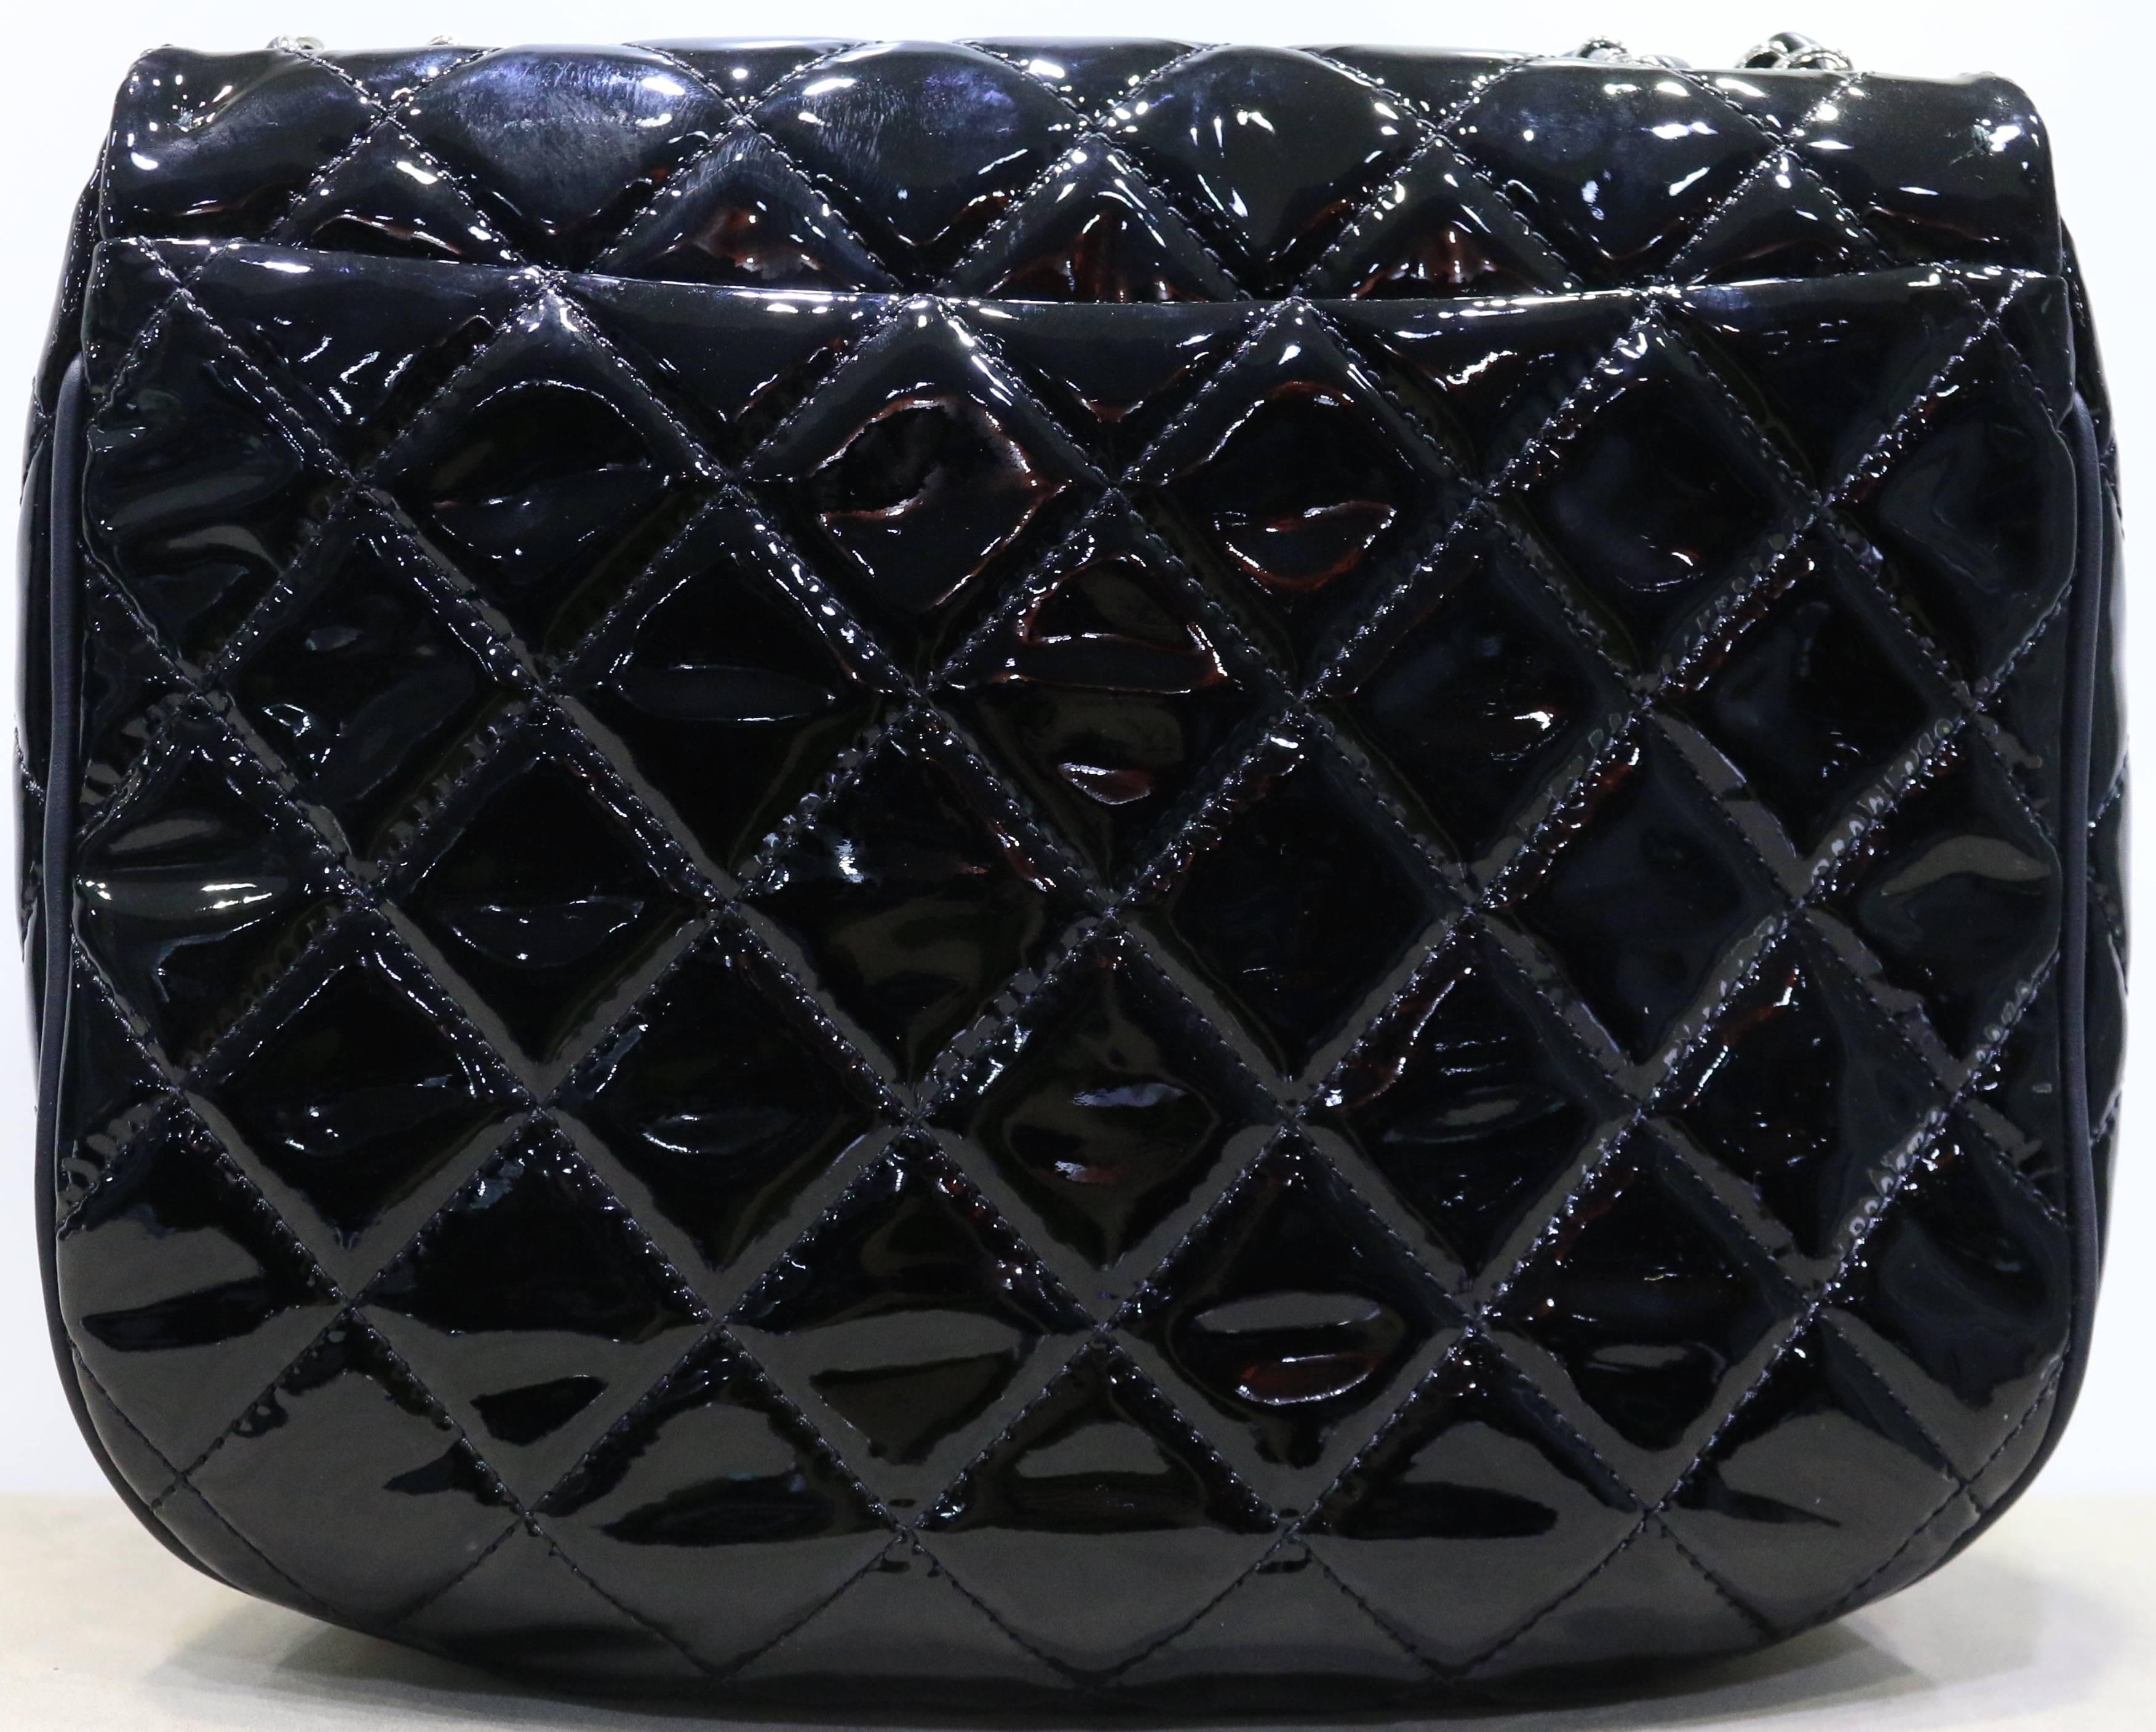 Women's Chanel Black Quilted Patent Leather Flap Bag with Silver Chain Leather Strap